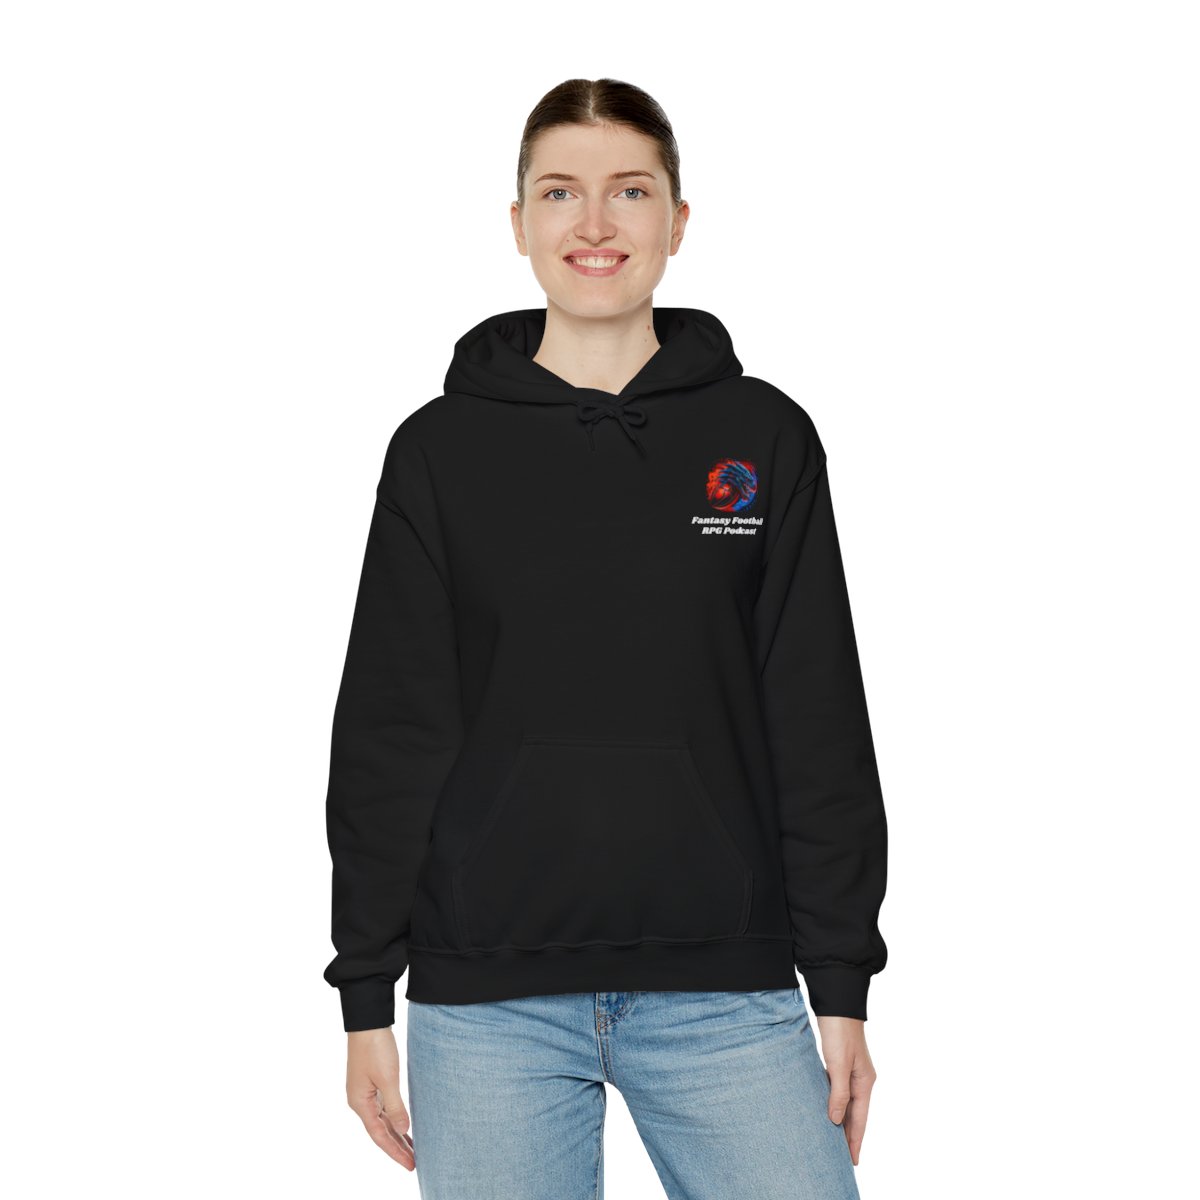 FFRPG Hoodie product thumbnail image